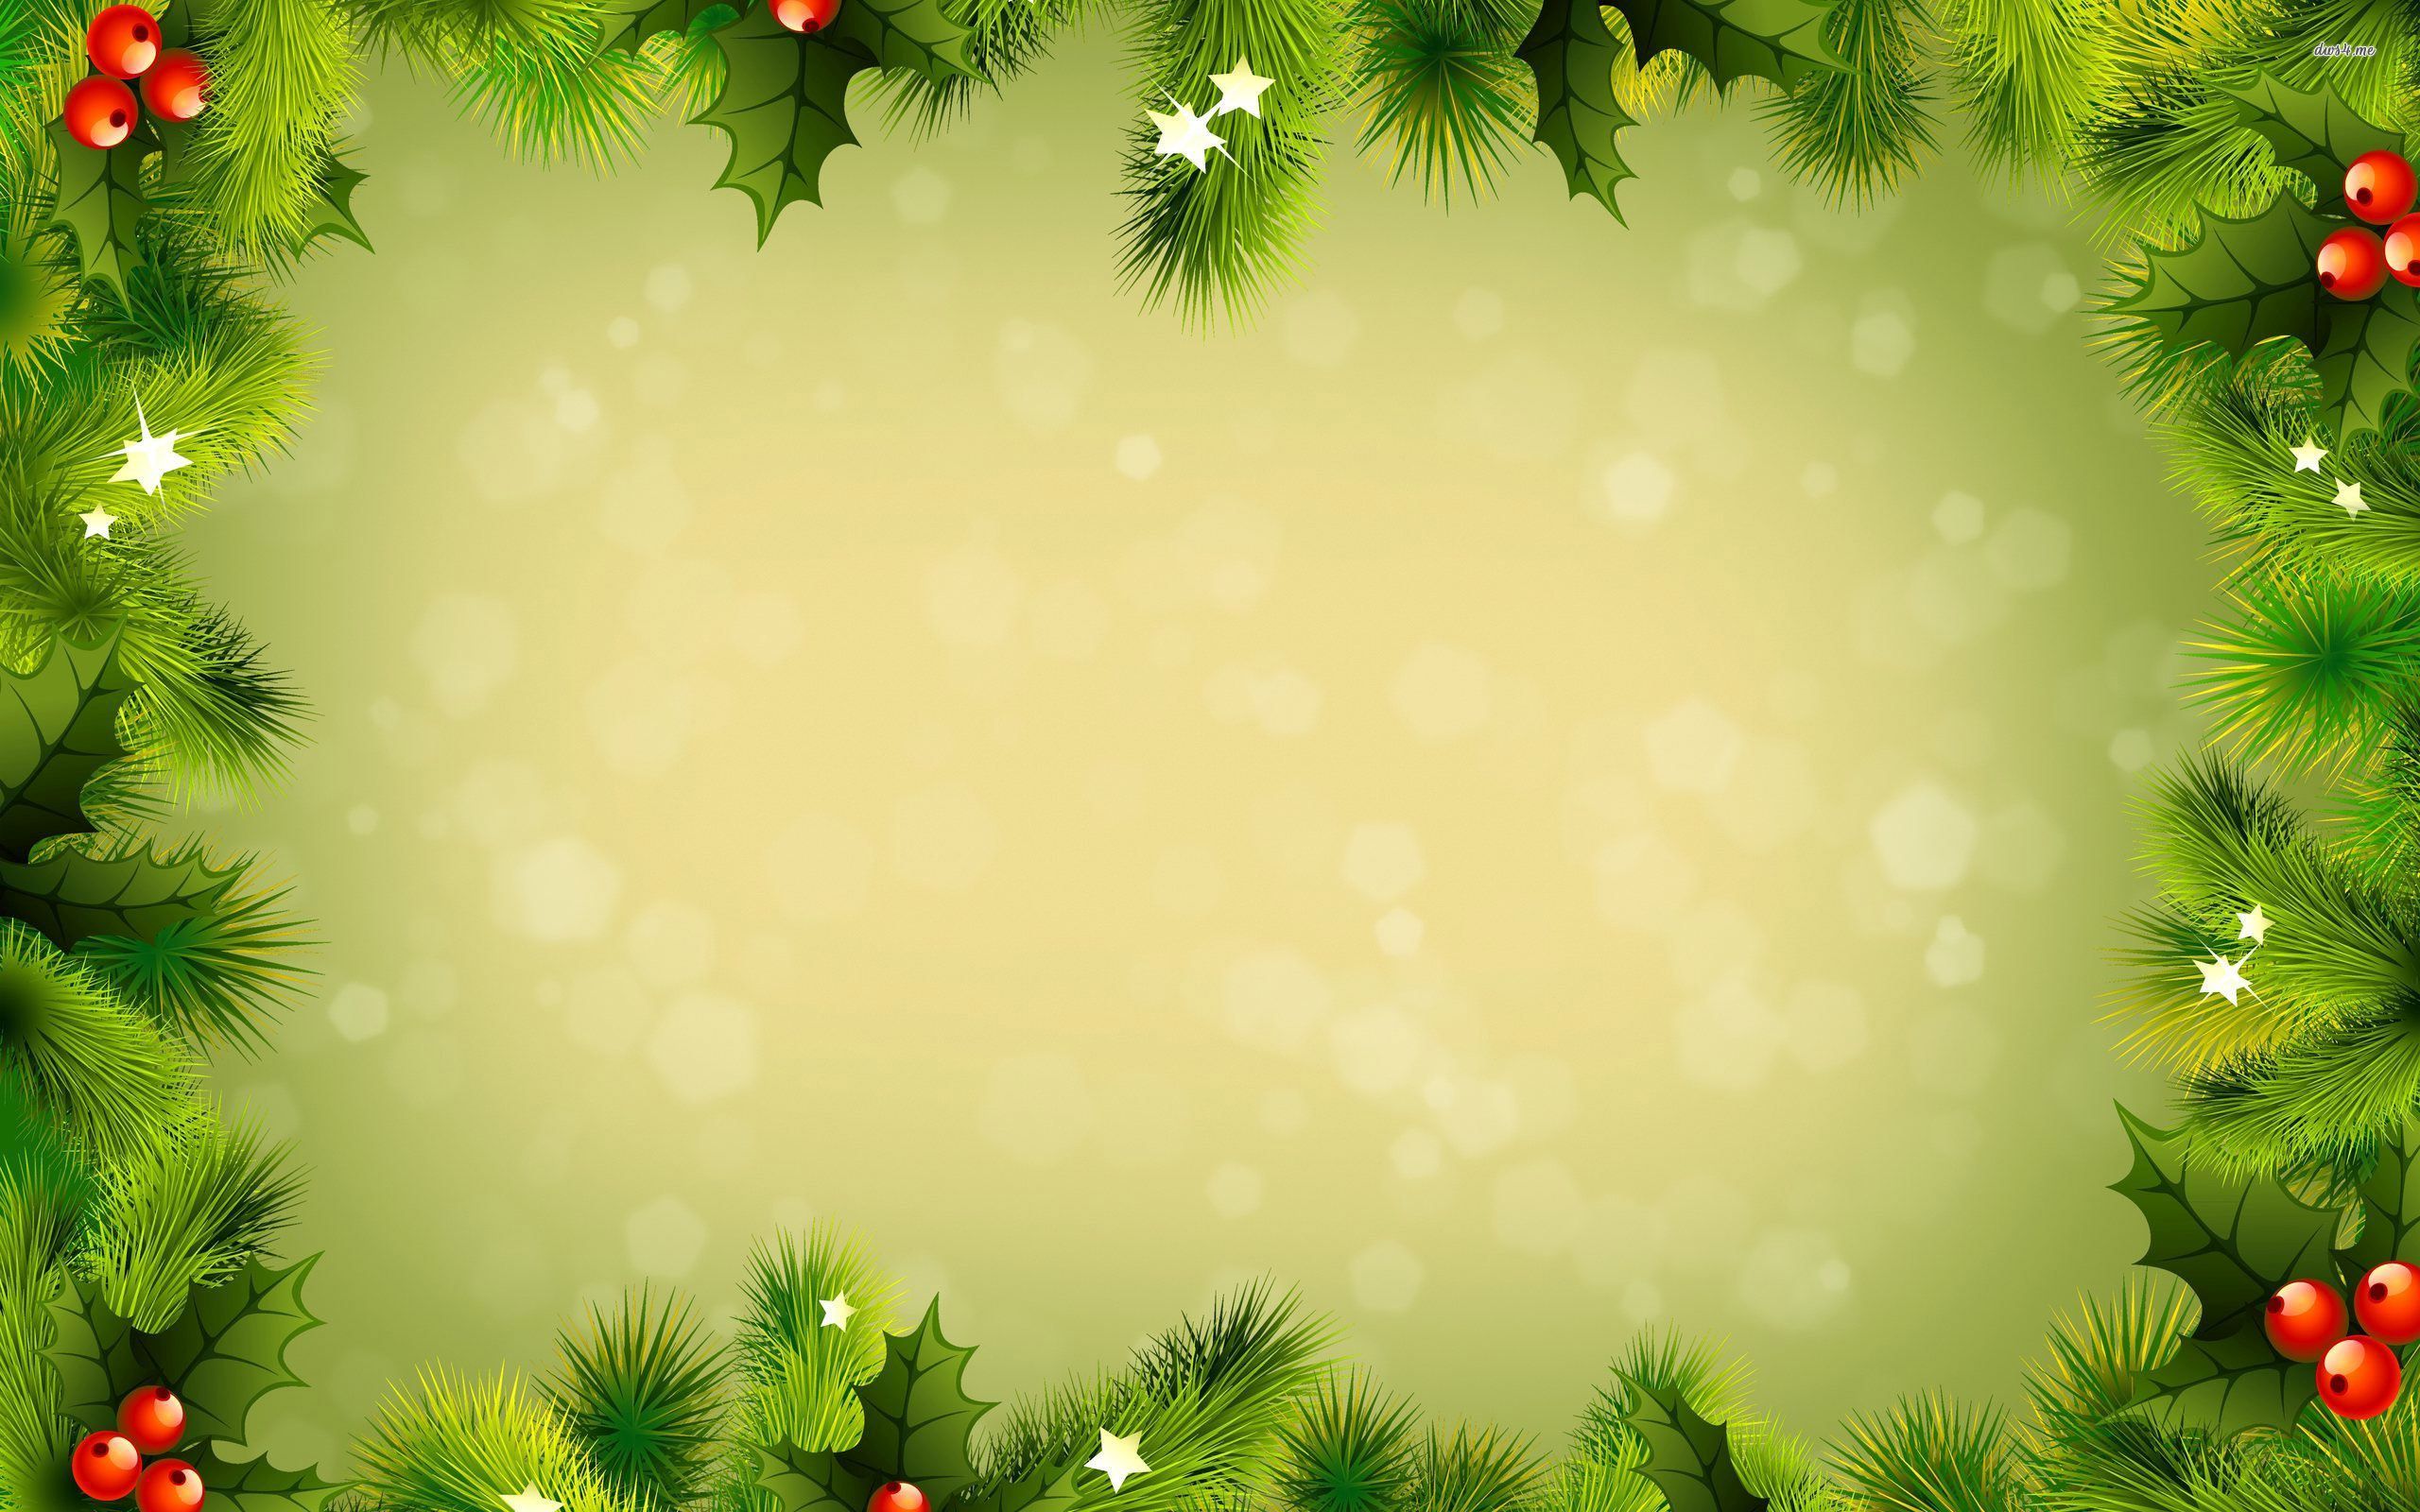 2015 Christmas wallpaer - images, wallpapers, photos, pictures